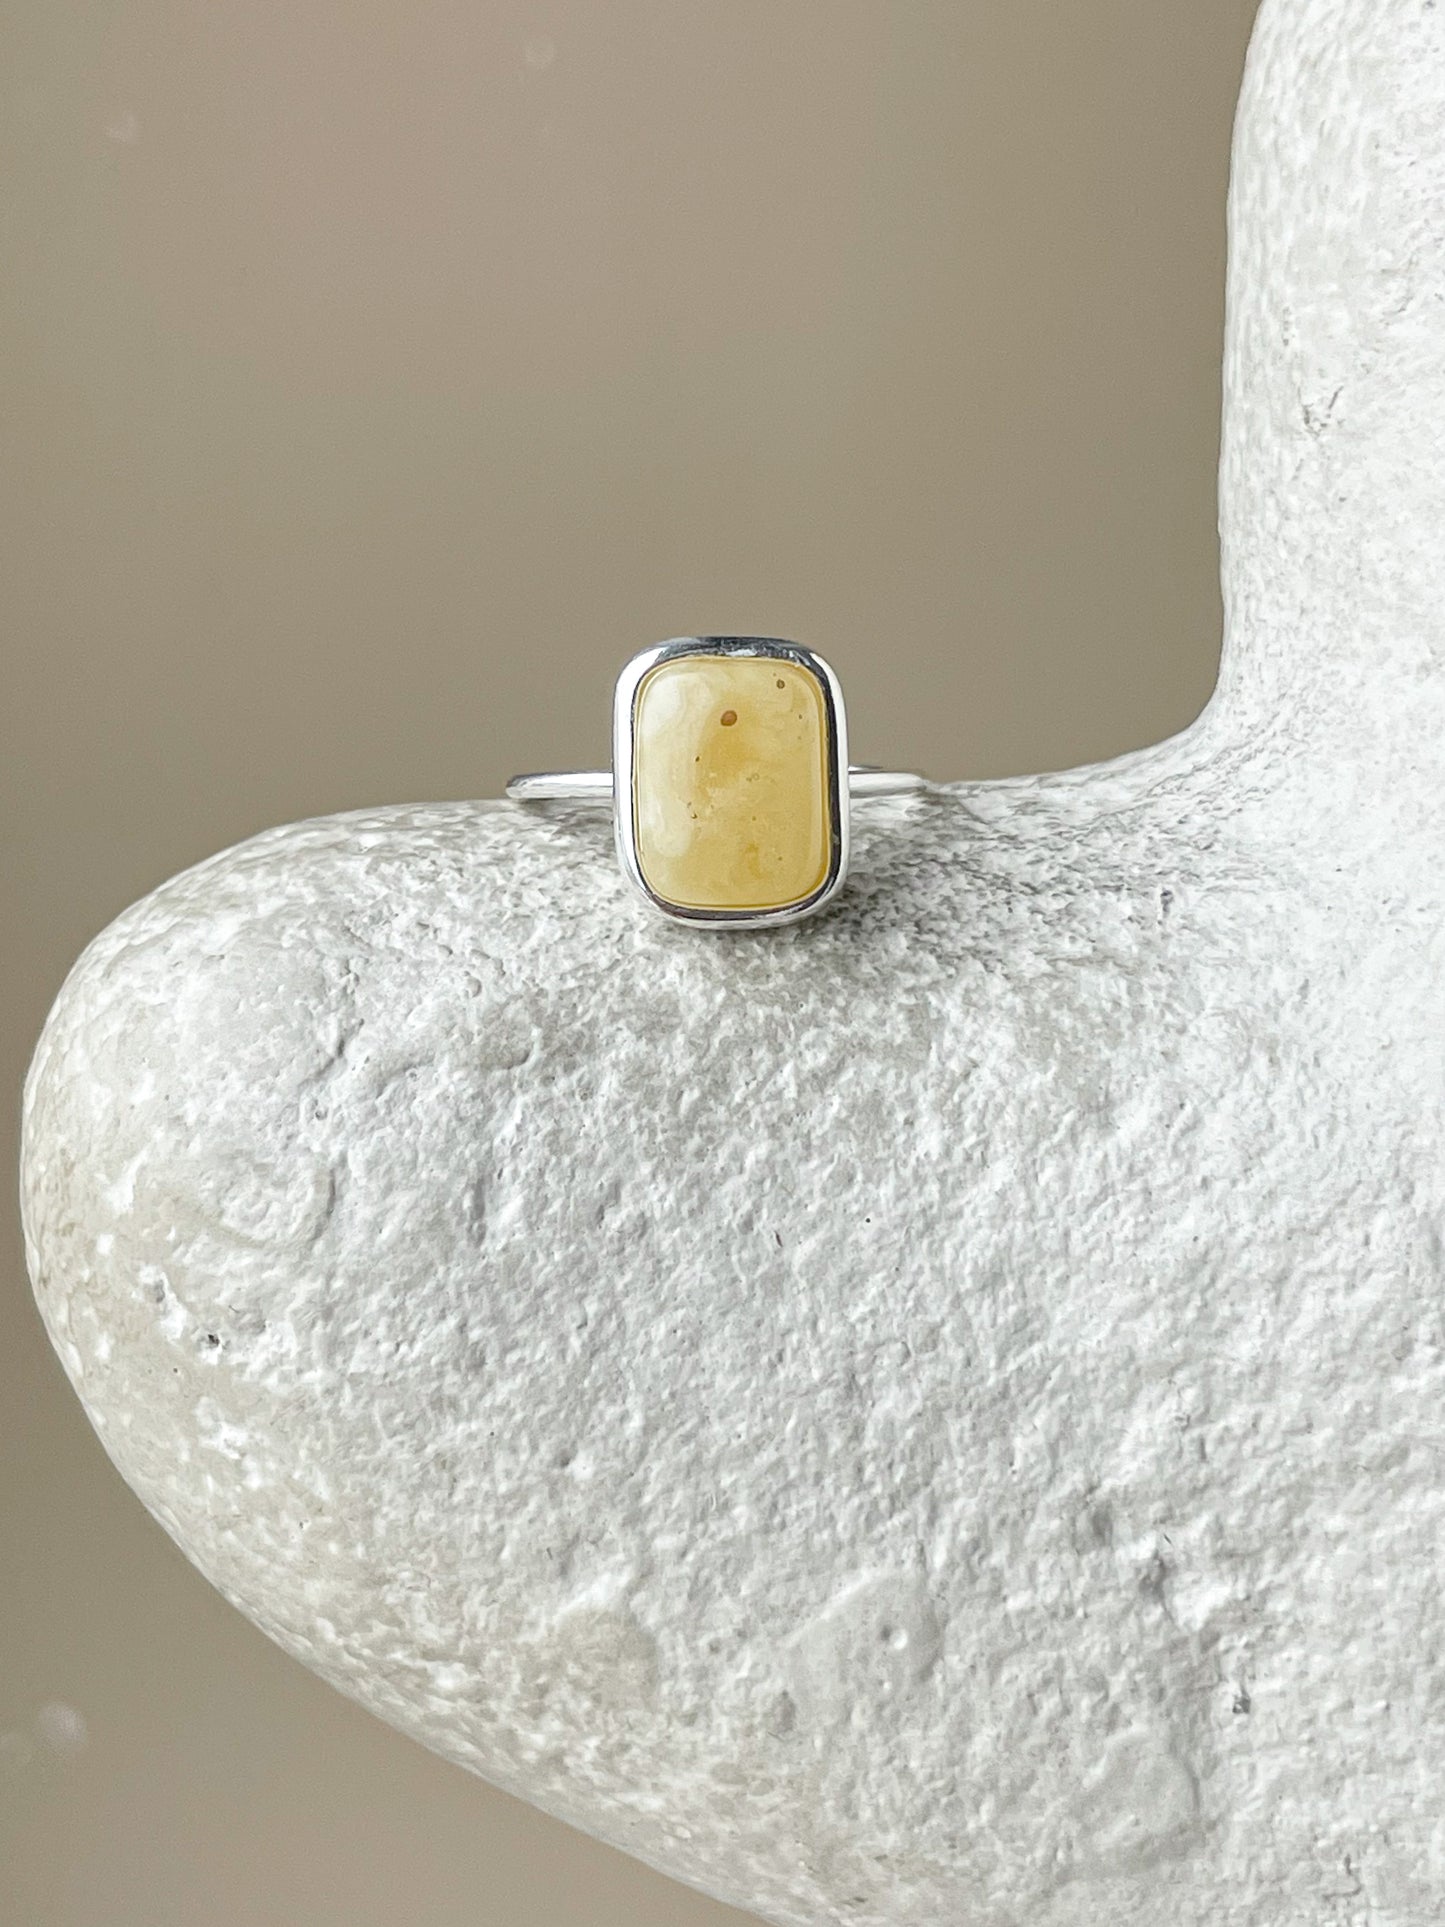 Matte amber ring - Sterling silver - Thin ring collection - Size 6 1/2